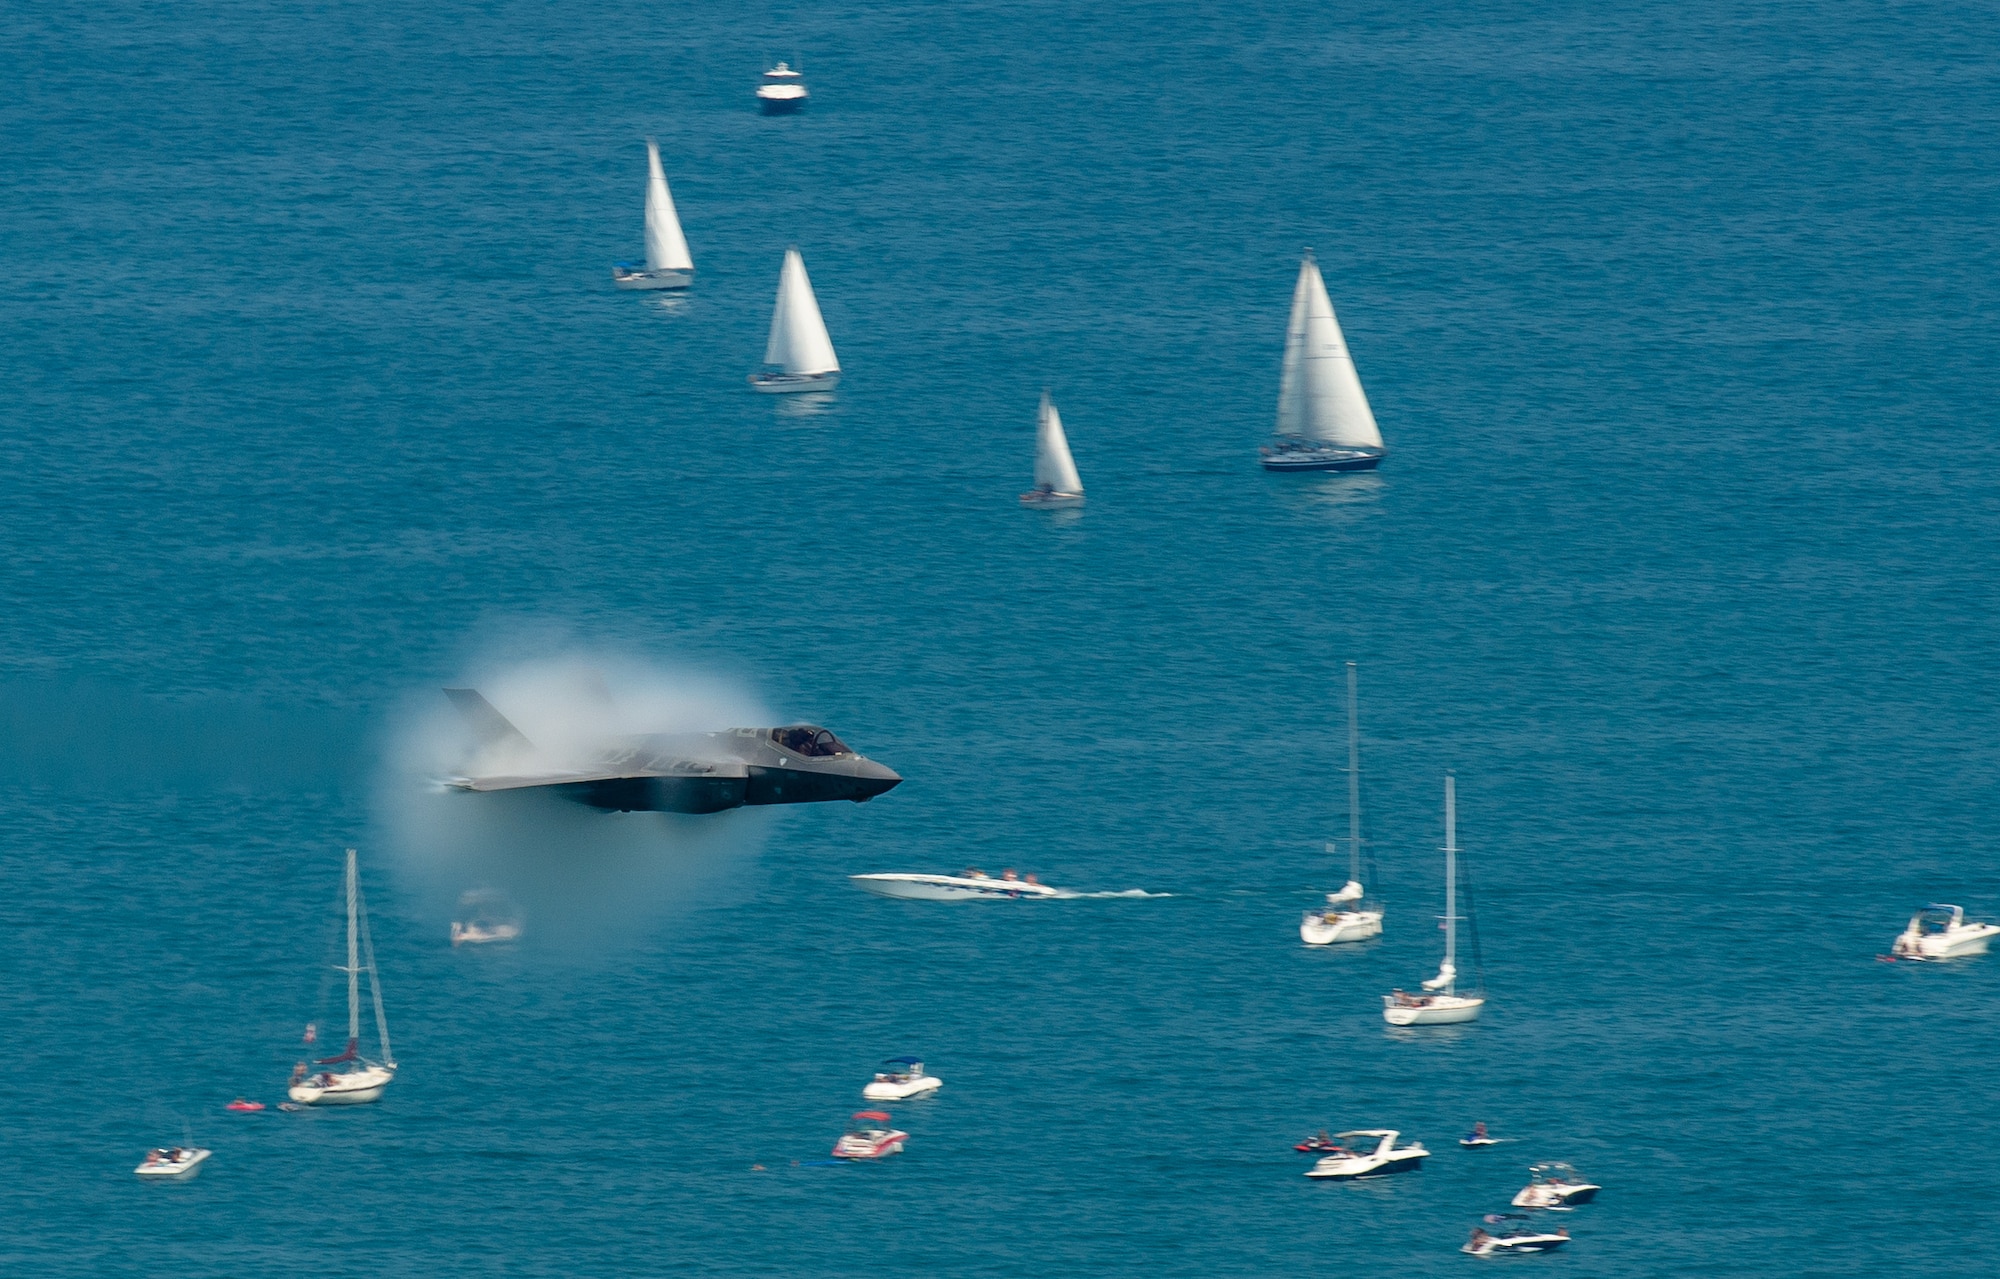 Capt. Andrew “Dojo” Olson, F-35 Heritage Flight Team pilot and commander, performs a high speed pass in an F-35A Lightning II over Lake Michigan during the Chicago Air and Water Show in Chicago, Aug. 19, 2018. The F-35A Lightning II is equipped with the largest single engine motor ever built and is capable of reaching speeds of up to 1,200 miles per hour. (U.S. Air Force photo by Airman 1st Class Alexander Cook)